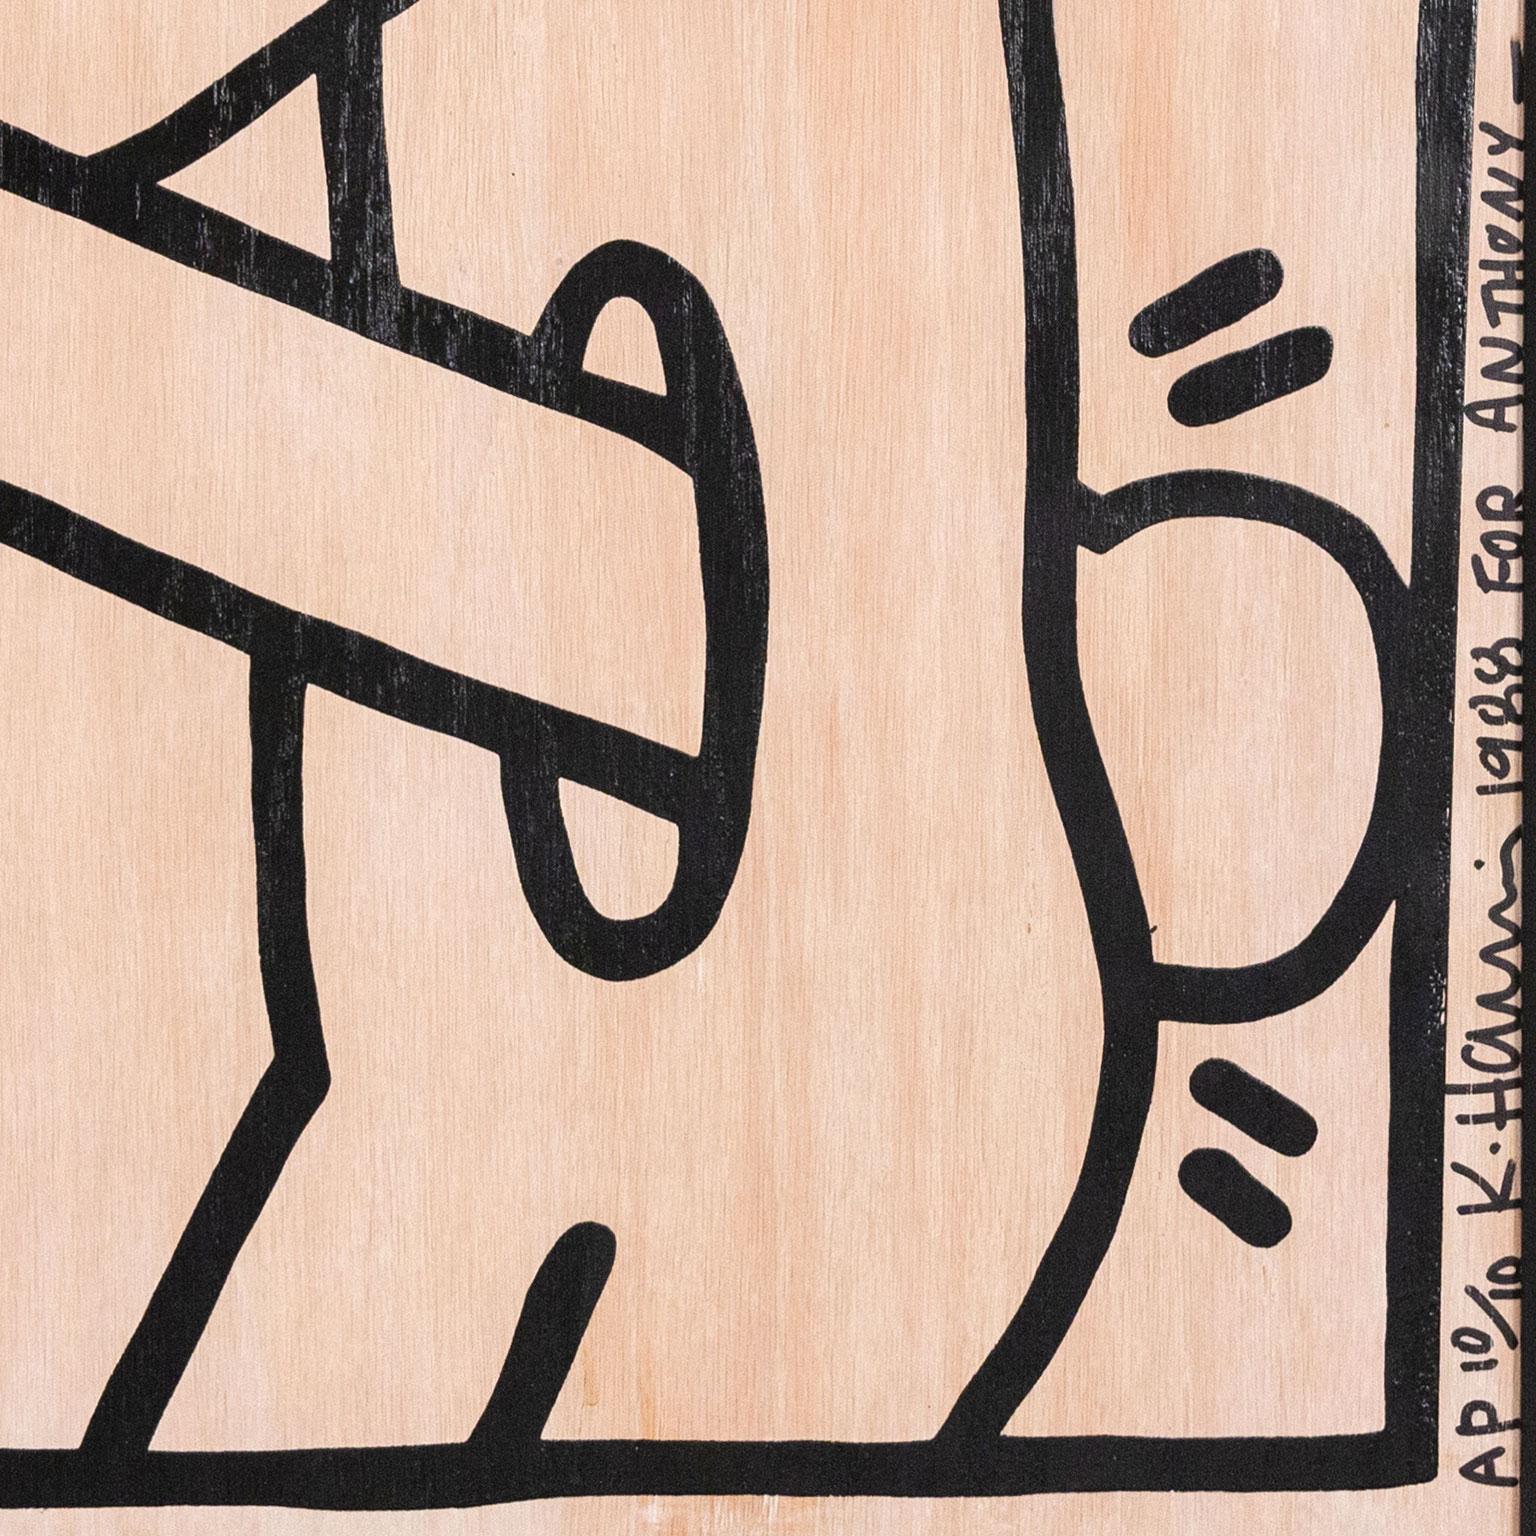 Art Attack on AIDS - Conceptual Print by Keith Haring